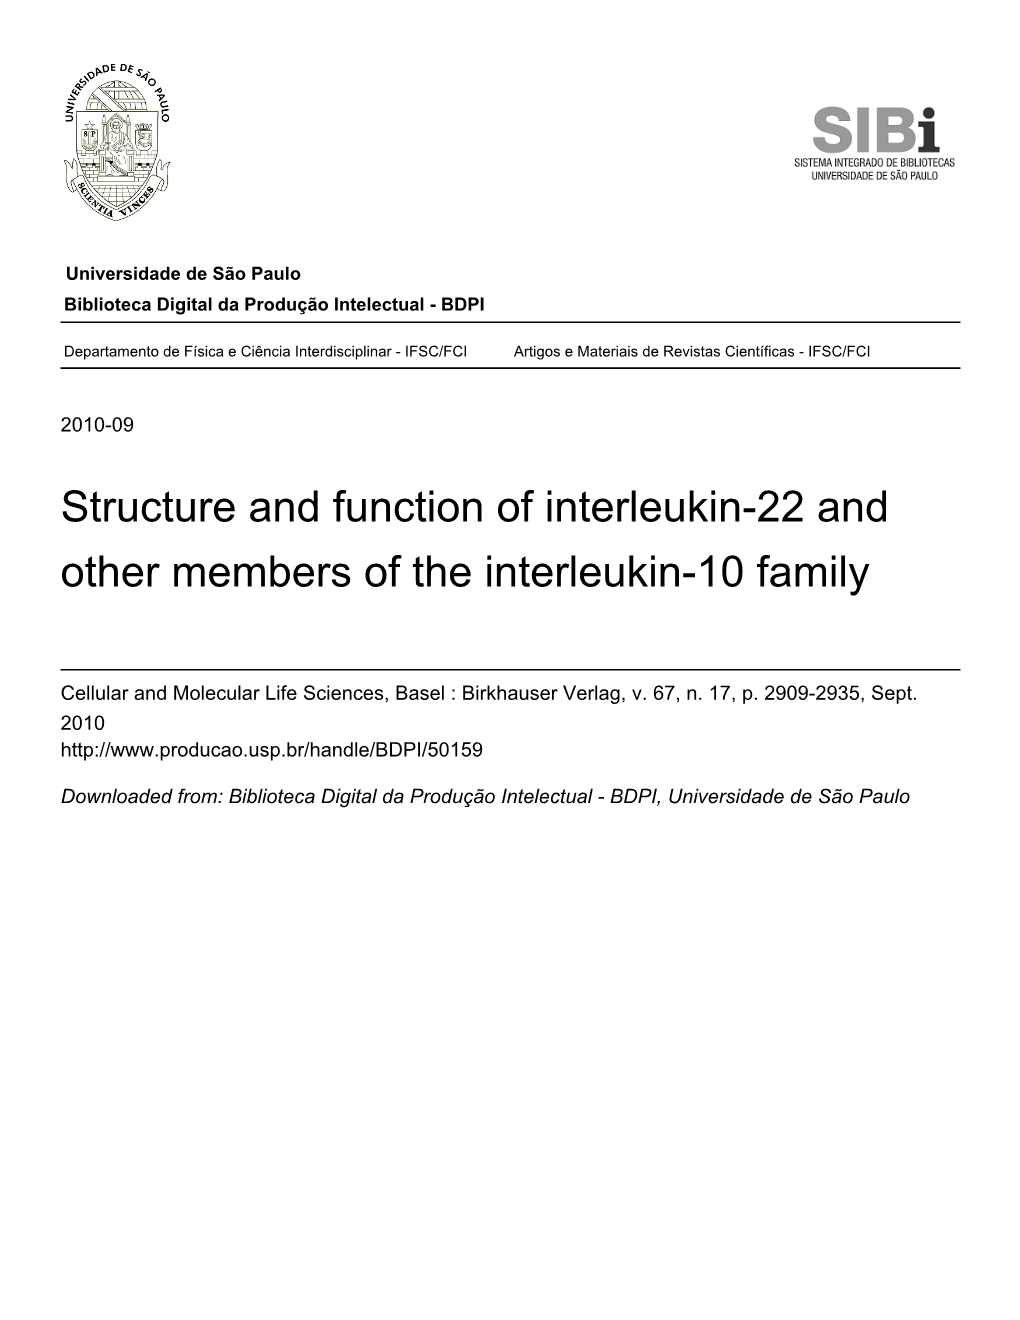 Structure and Function of Interleukin-22 and Other Members of the Interleukin-10 Family